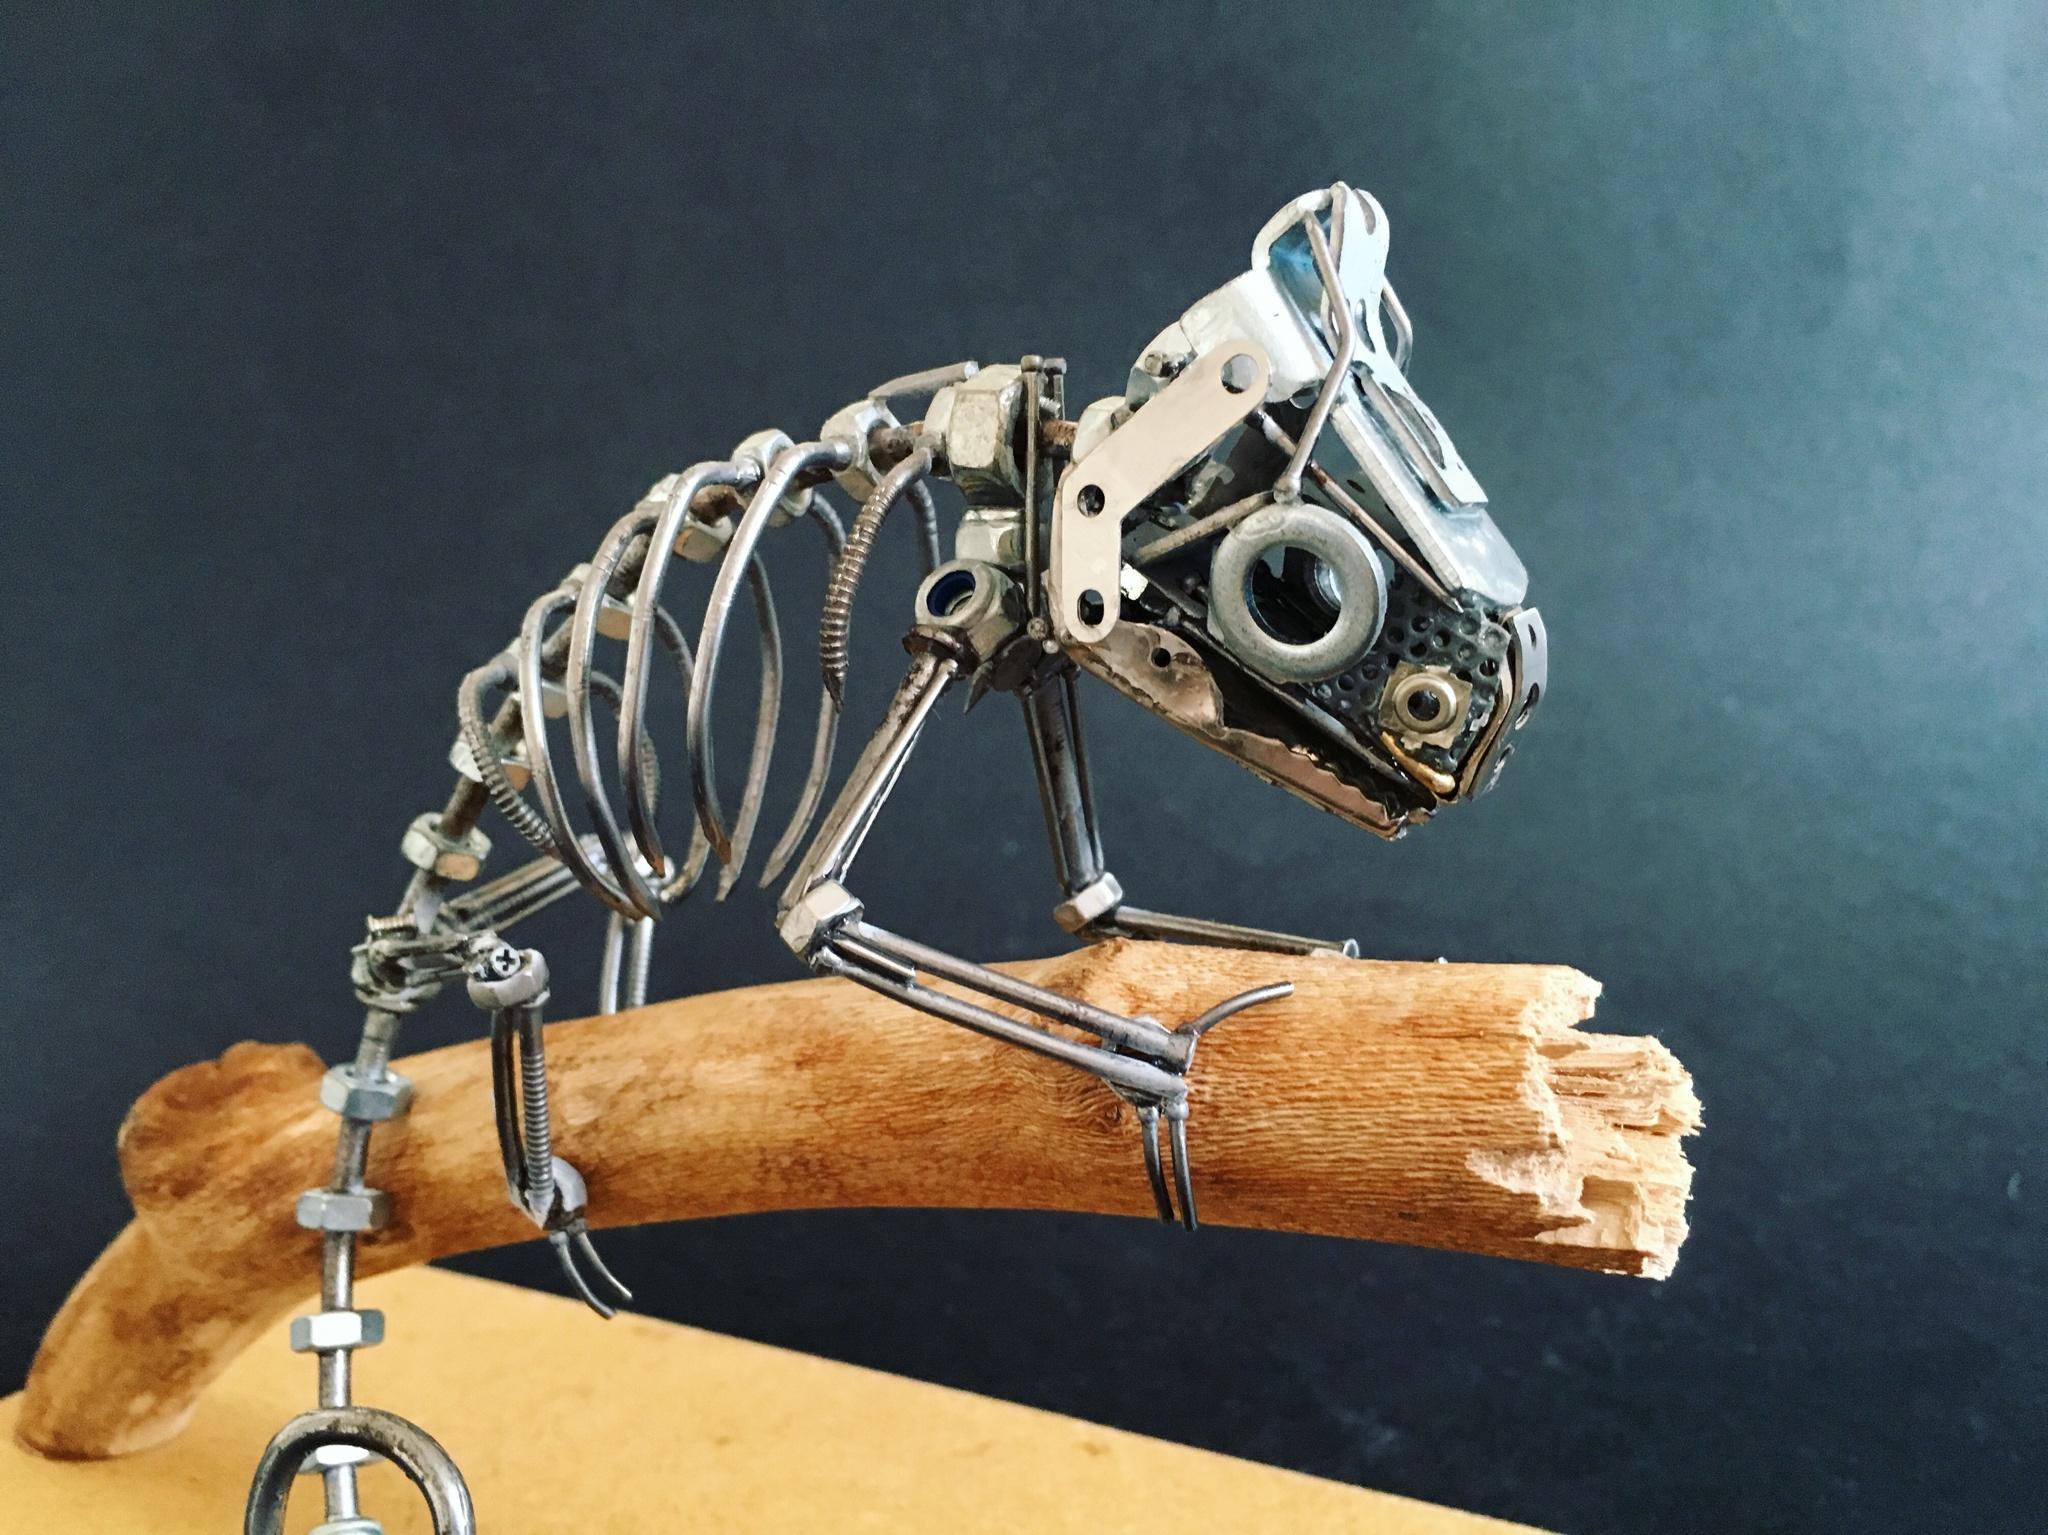 My contribution to the skeleton battle – a chameleon I made from nails!